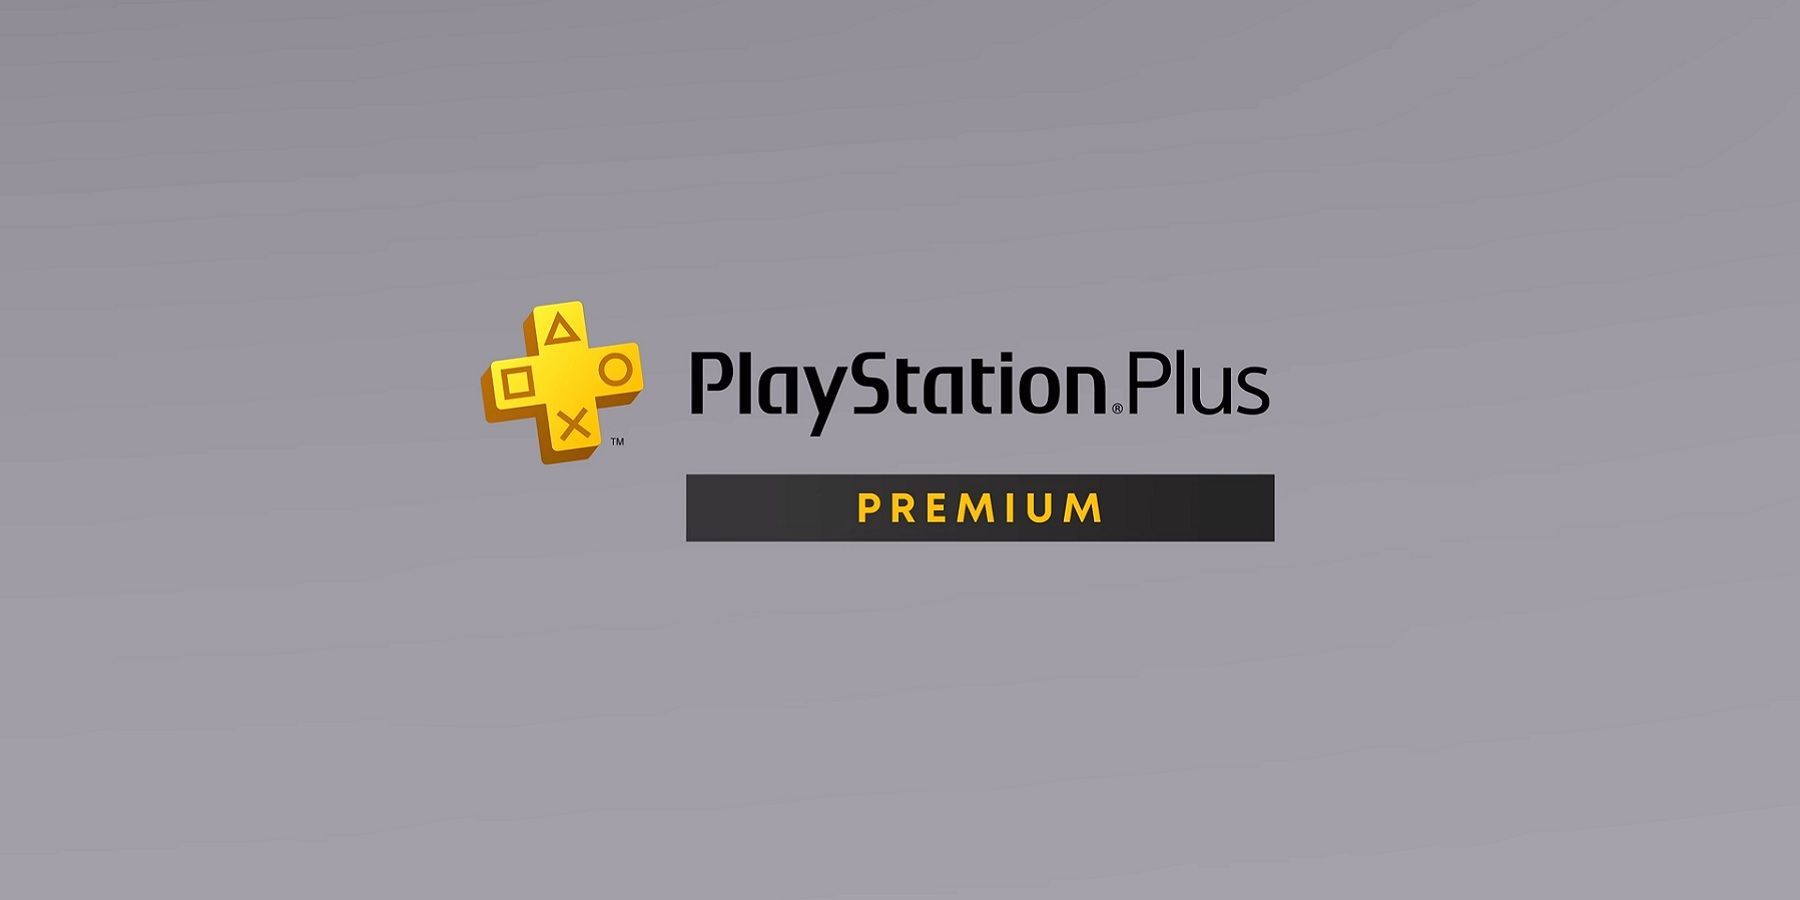 PlayStation Contest Lets You Win Free PS Plus Premium